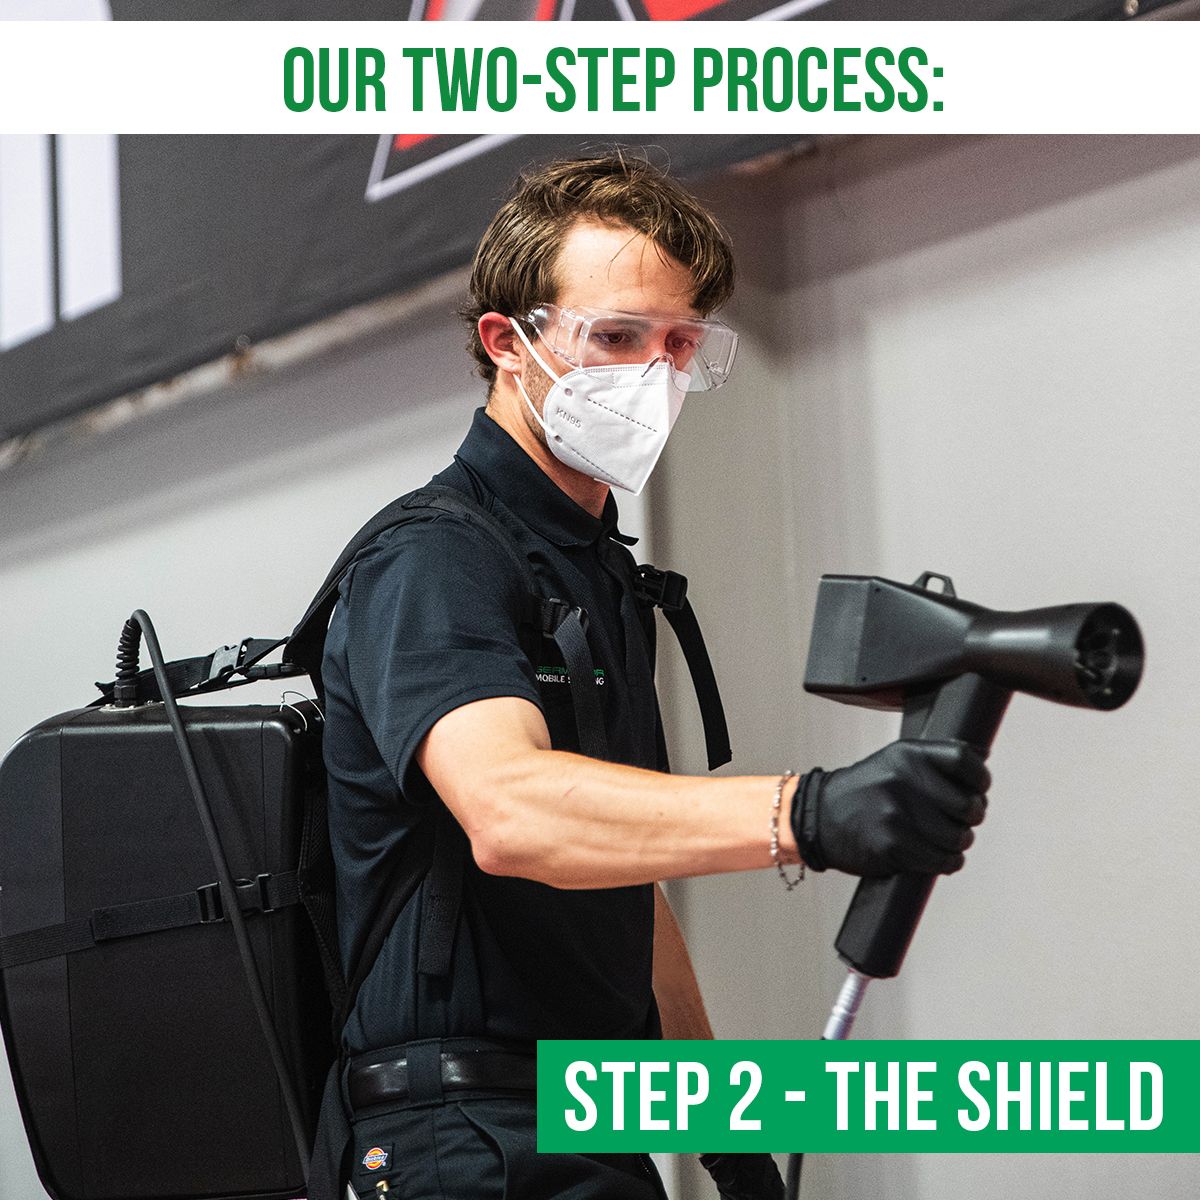 Our Two-Step Process: Step 2 - The Shield